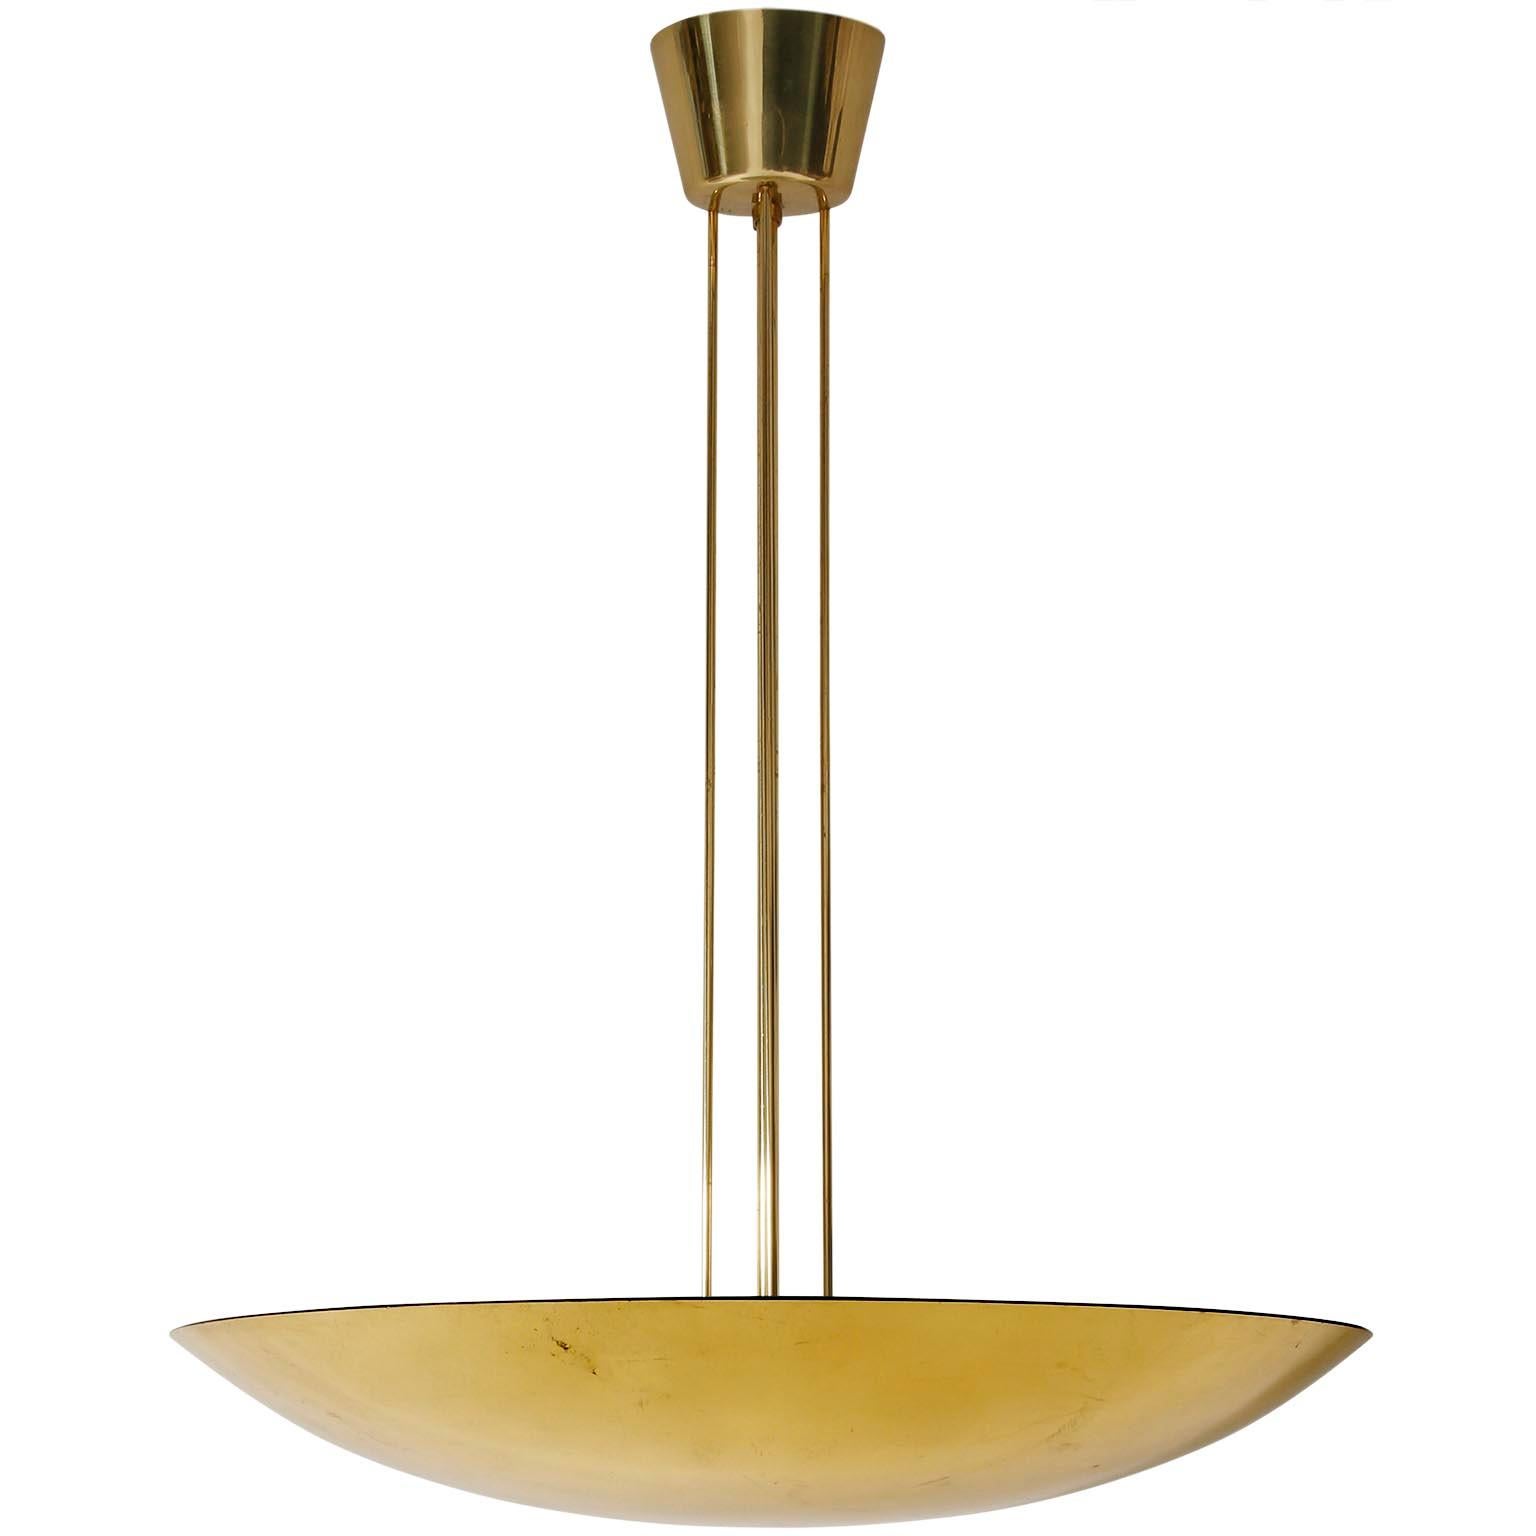 One of three polished brass bowl up light chandeliers / pendant light fixtures by J.T. Kalmar, Austria, manufactured in midcentury, circa 1970 (late 1960s or early 1970s).
This uplighter has three sockets for medium screw base bulbs. It works well